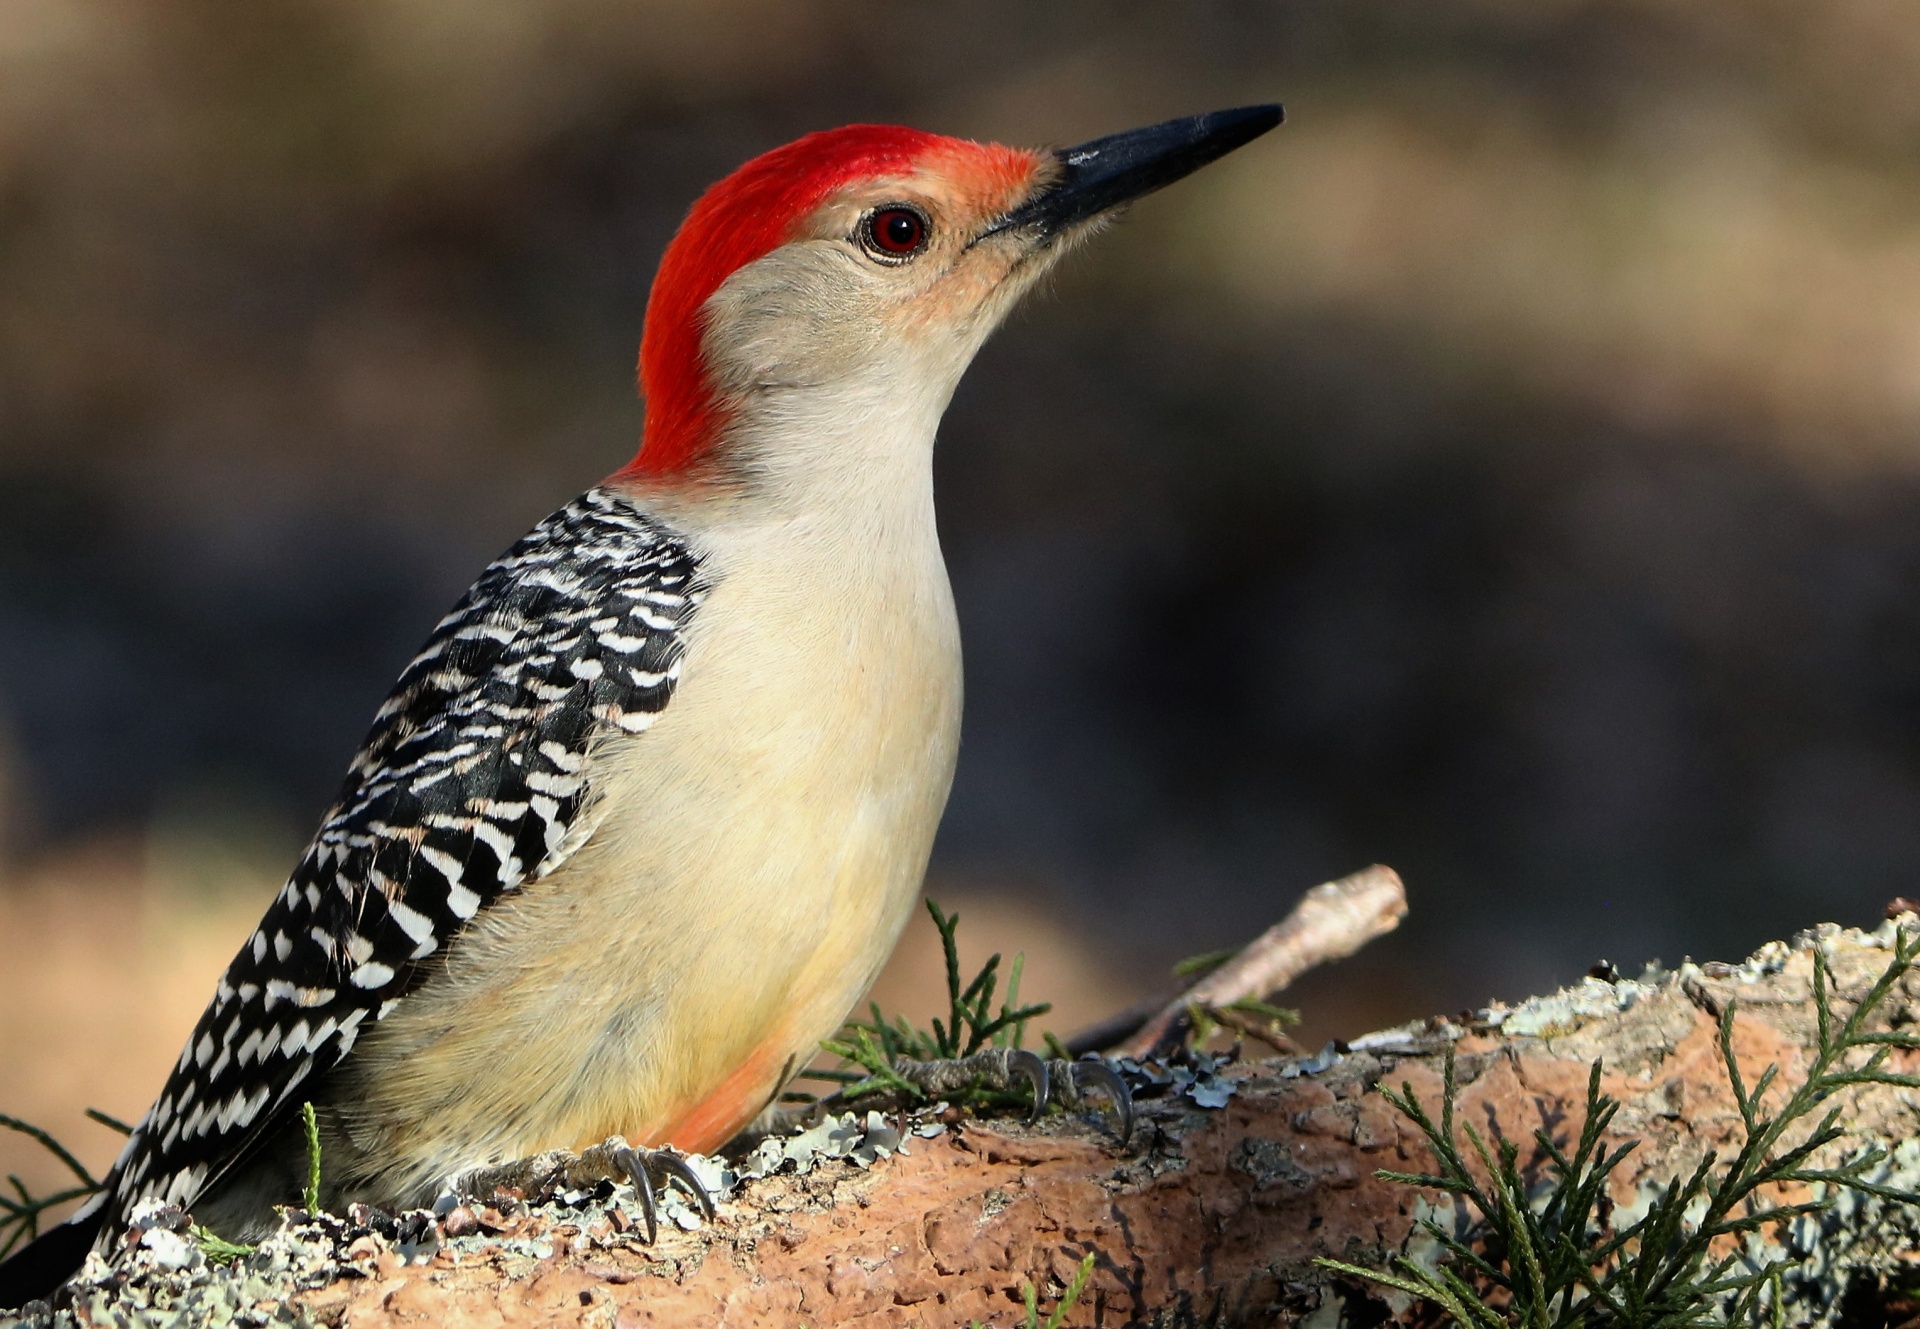 Red-bellied Woodpecker Close-up